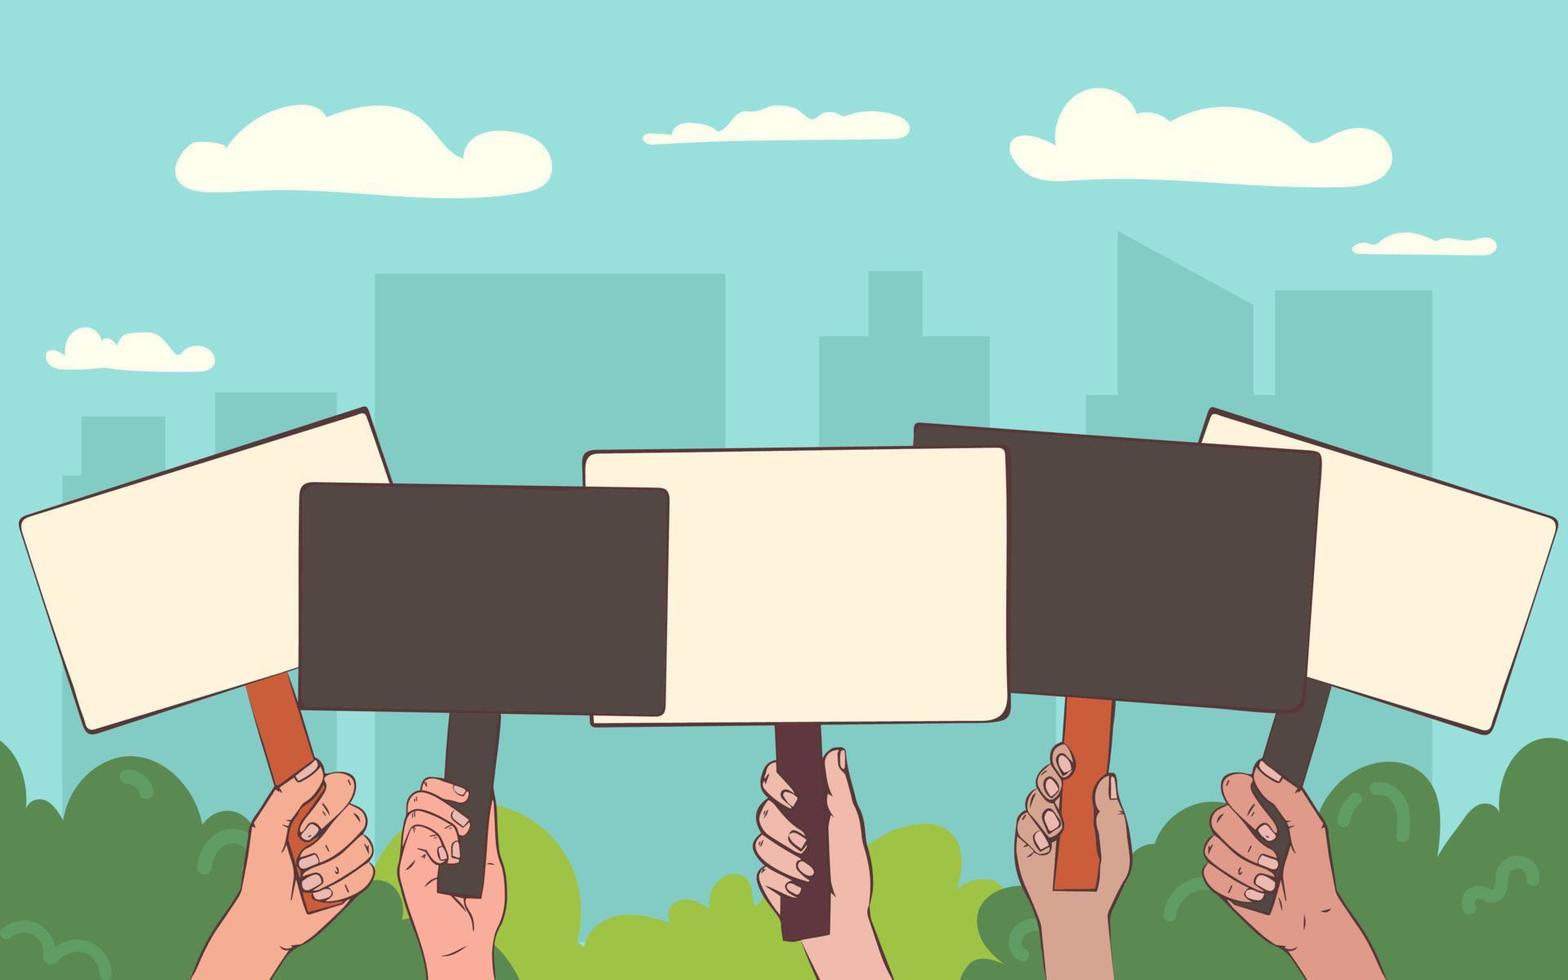 Hands holding banners. Concept of voting, protest, rally. Demonstration, crowd of people with blank placards. Vector flat cartoon illustration of hands raised up on blue background